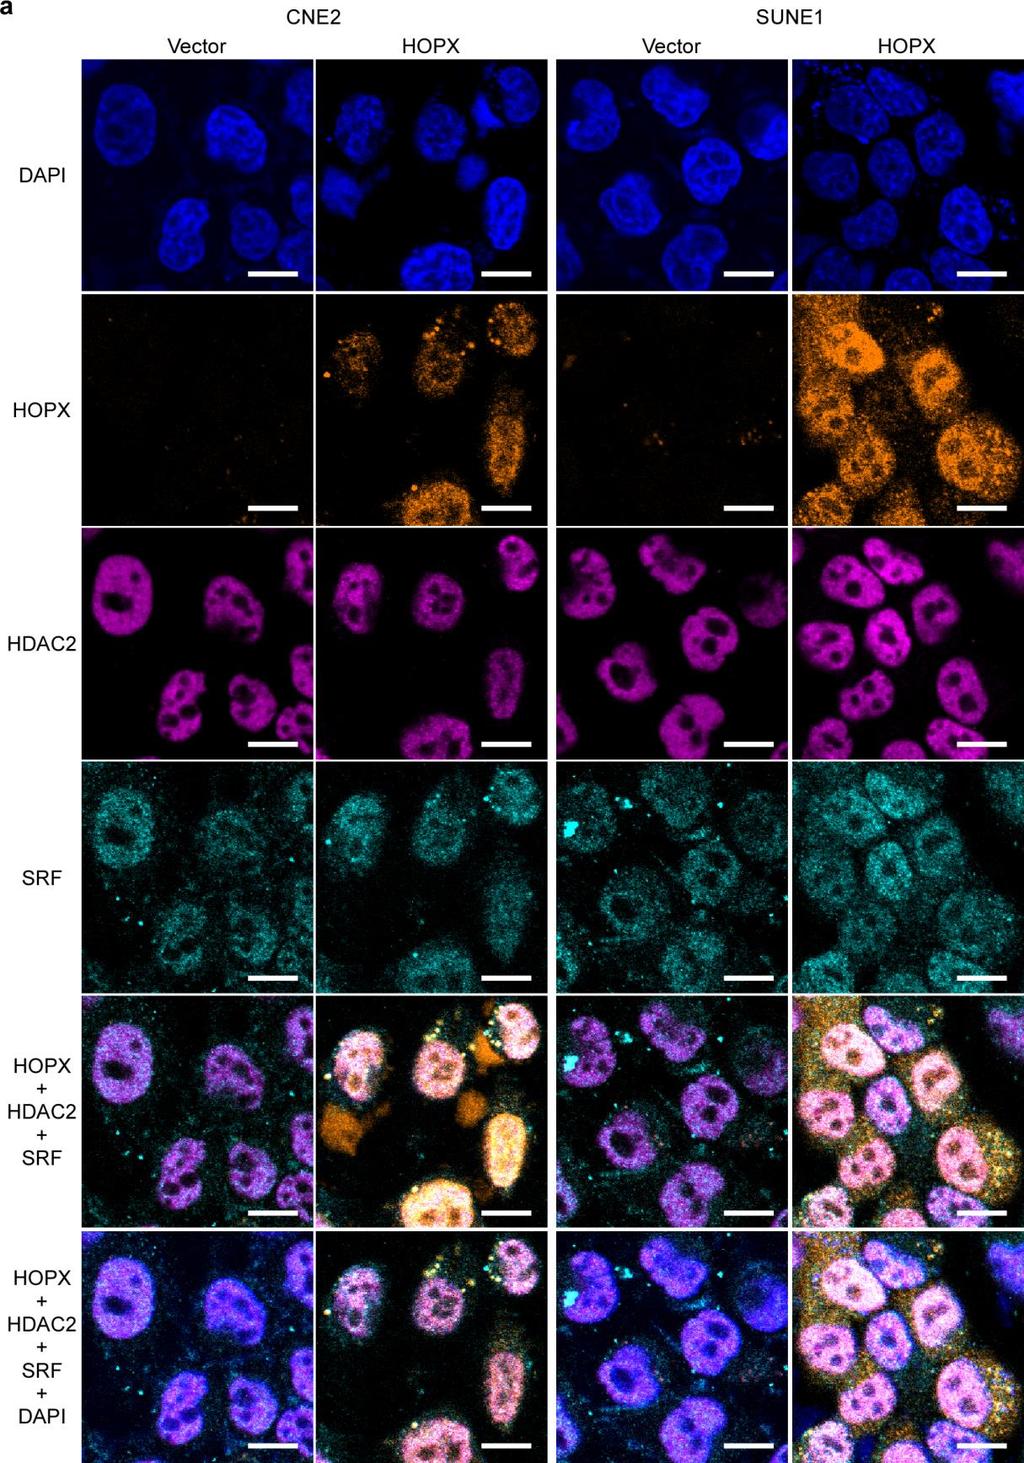 Supplementary Figure 10. HOPX is co-localized with HDAC2 and SRF in NPC cells.